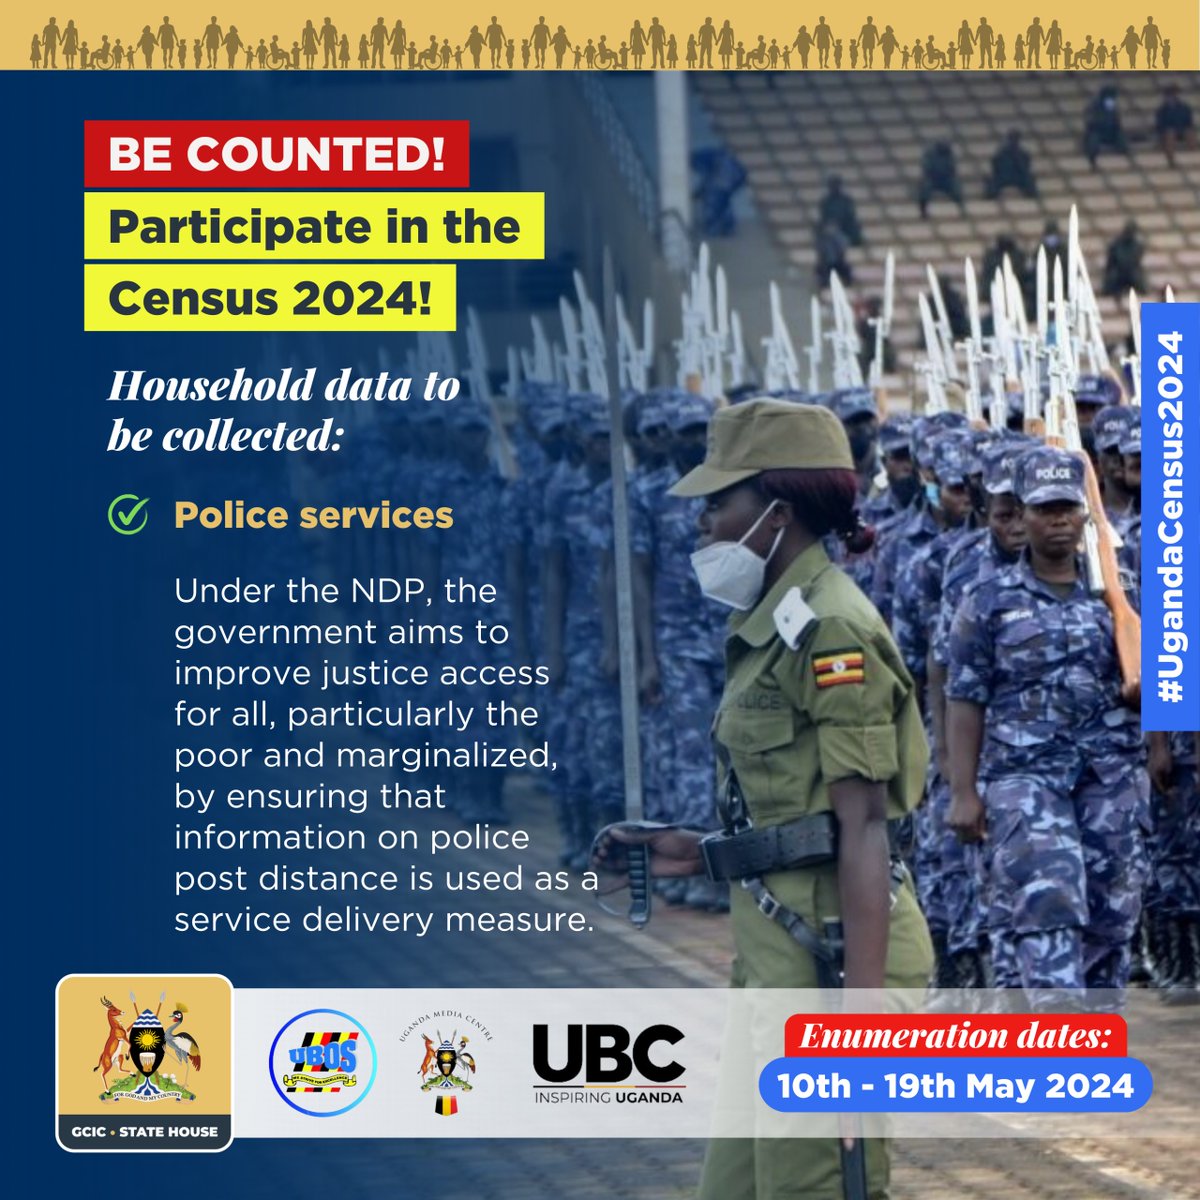 𝐍𝐀𝐓𝐈𝐎𝐍𝐀𝐋 𝐂𝐄𝐍𝐒𝐔𝐒 𝟐𝟎𝟐𝟒 Under the NDP,the government aims to improve justice access for all,particularly the poor and marginalised,by ensuring that information on police post distance is used as a service delivery measure. #UgandaCensus2024